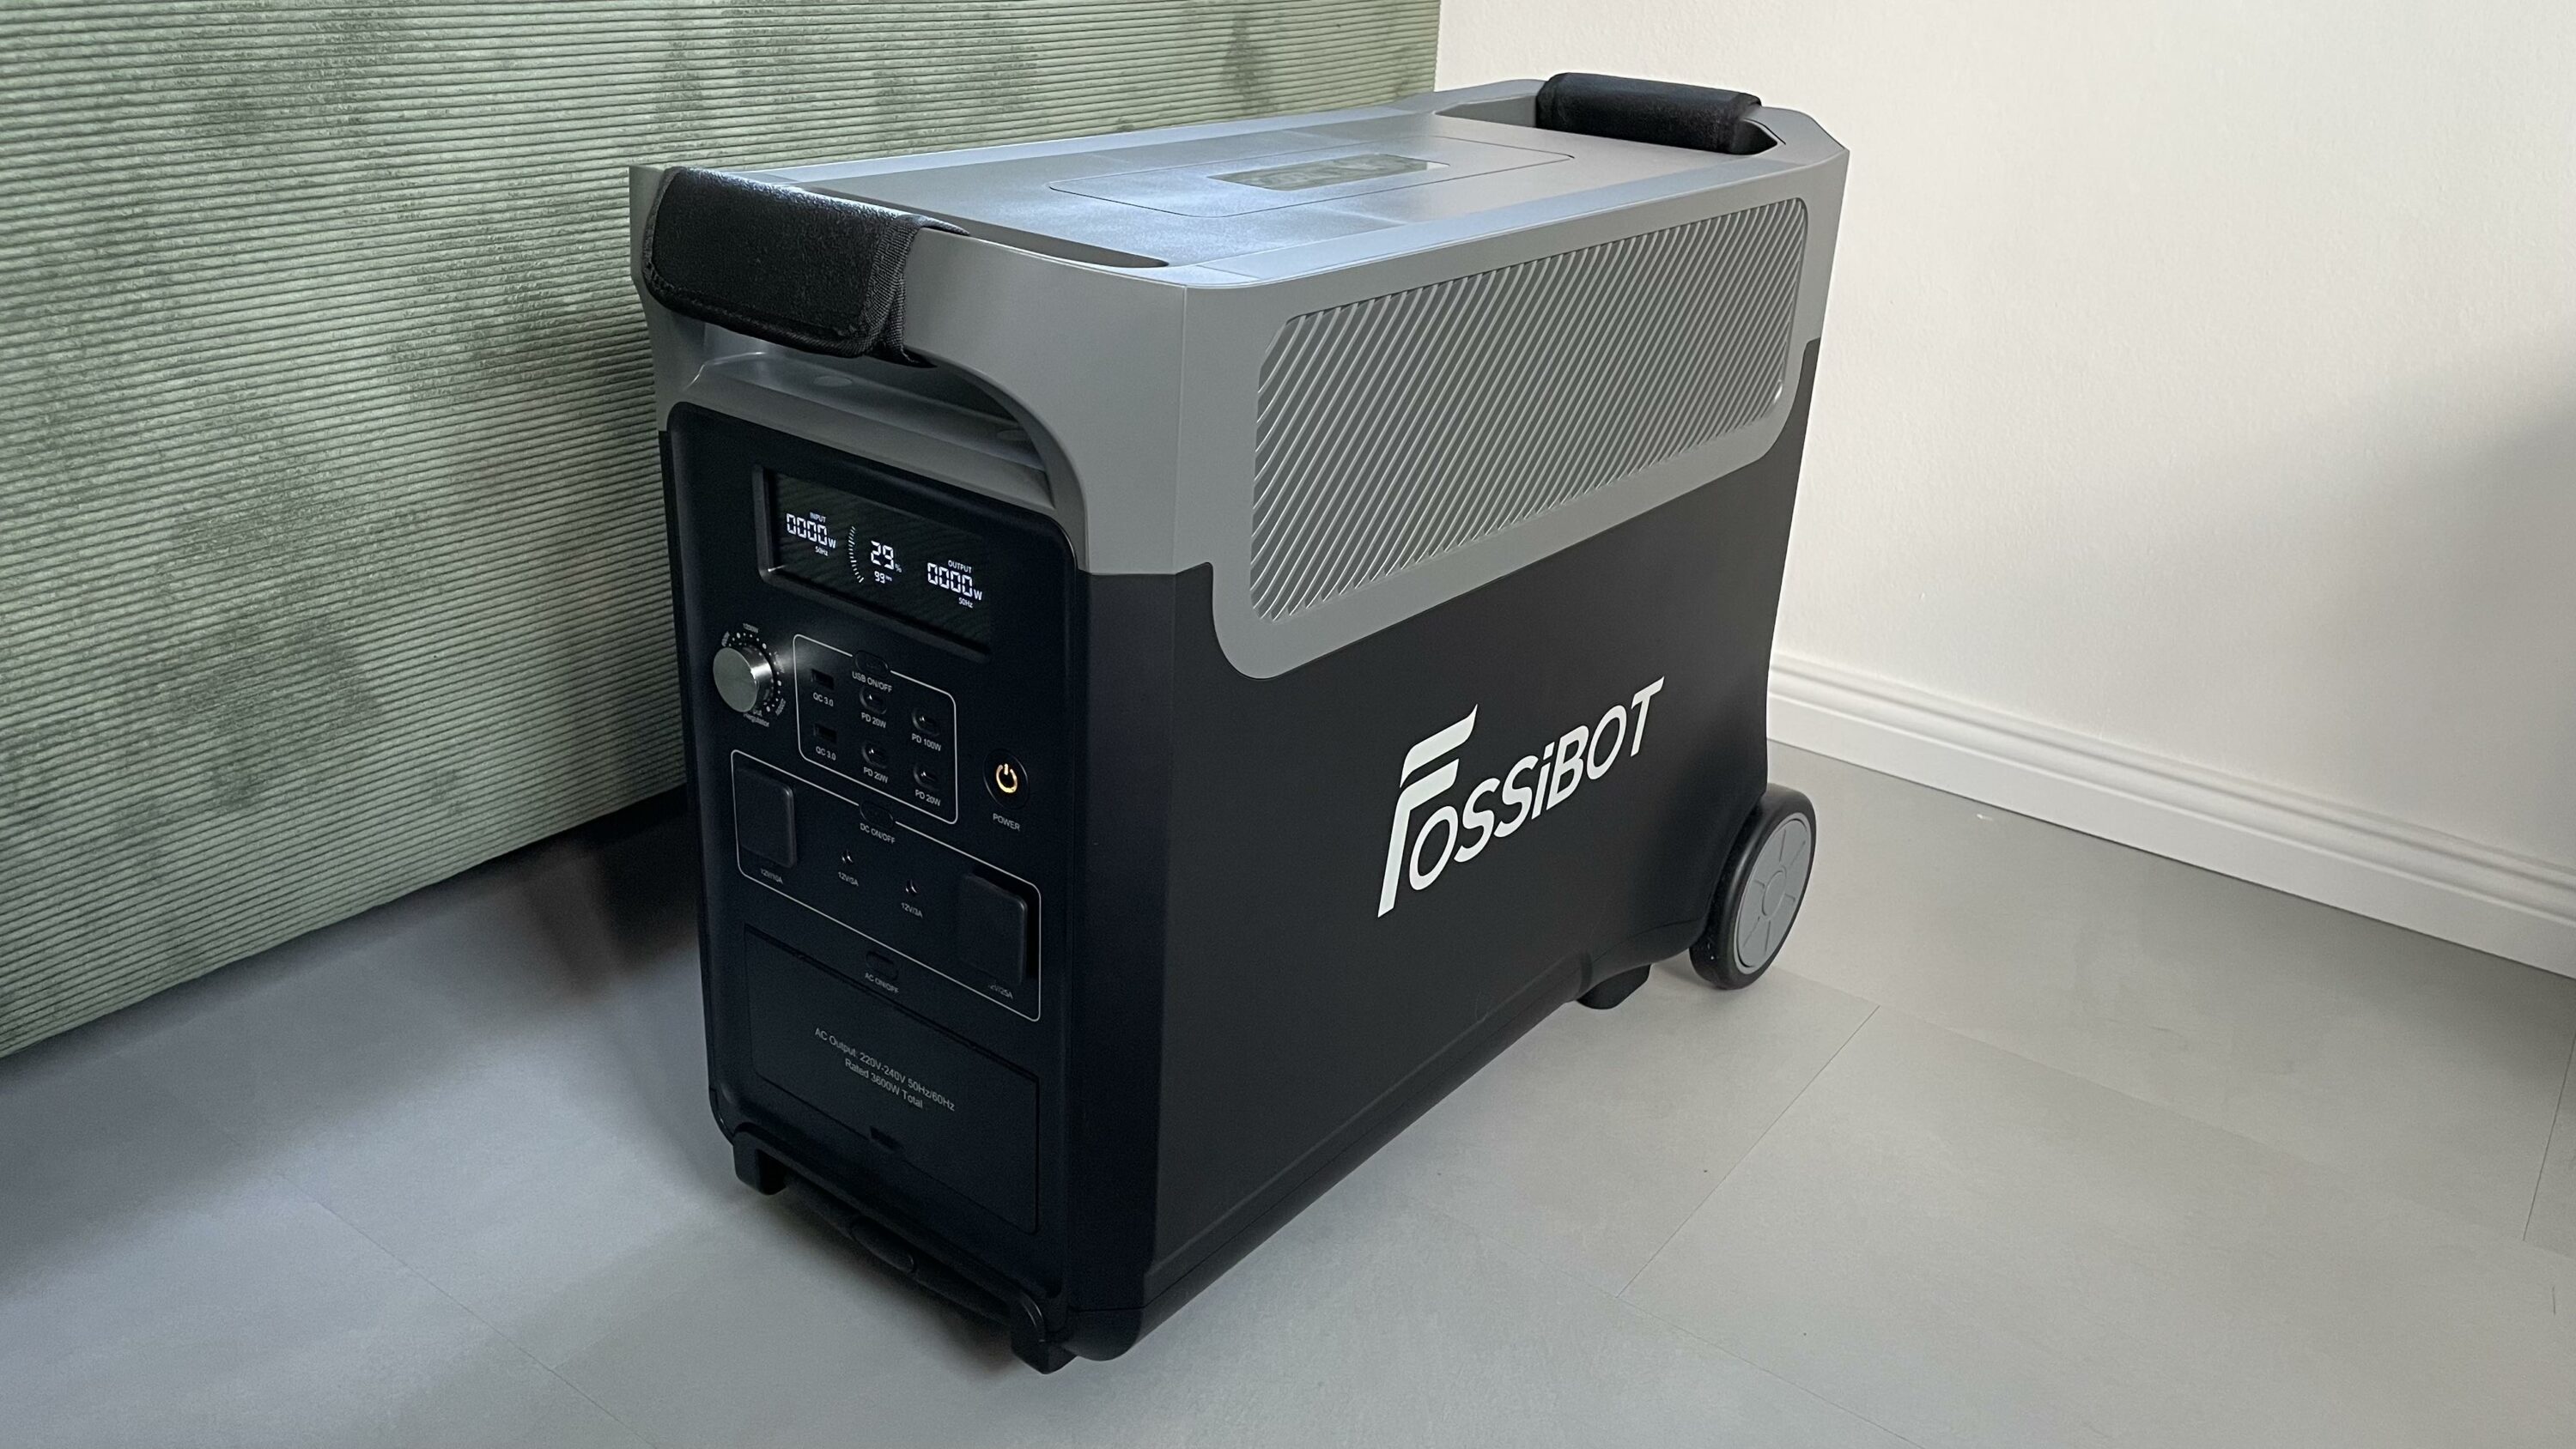 FOSSiBOT: Portable power stations, Rugged Smartphones